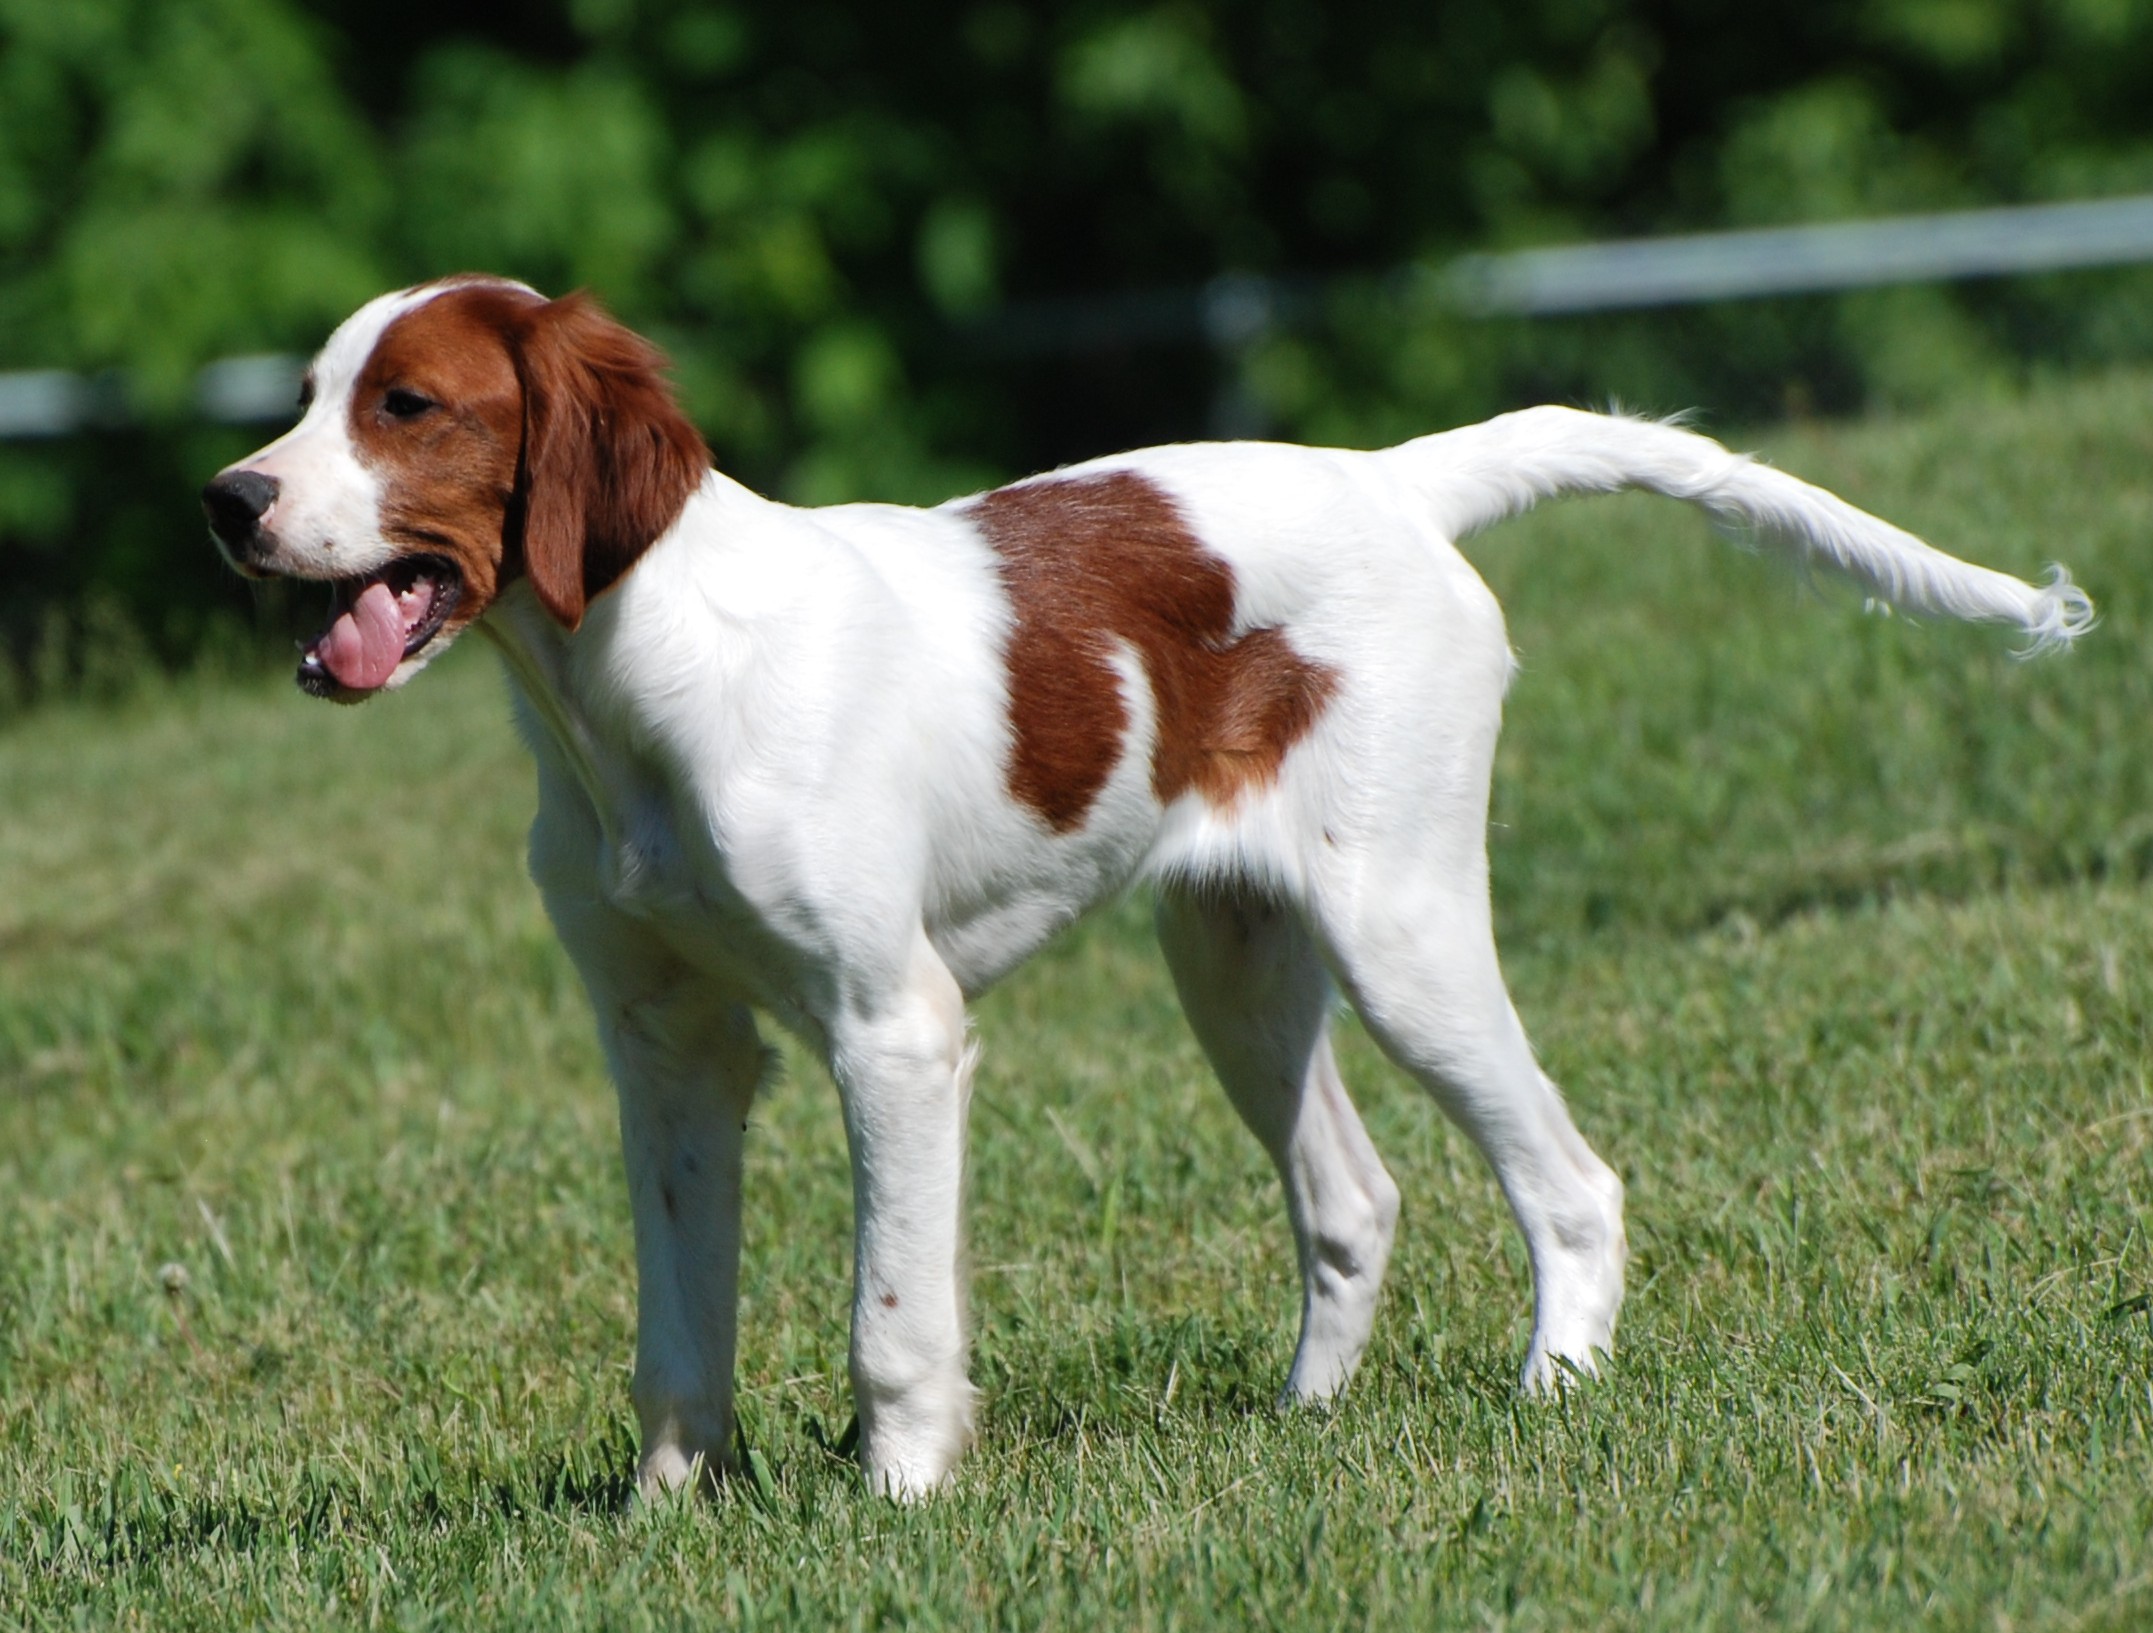 Lovely Irish Red and White Setter dog photo and wallpaper ...